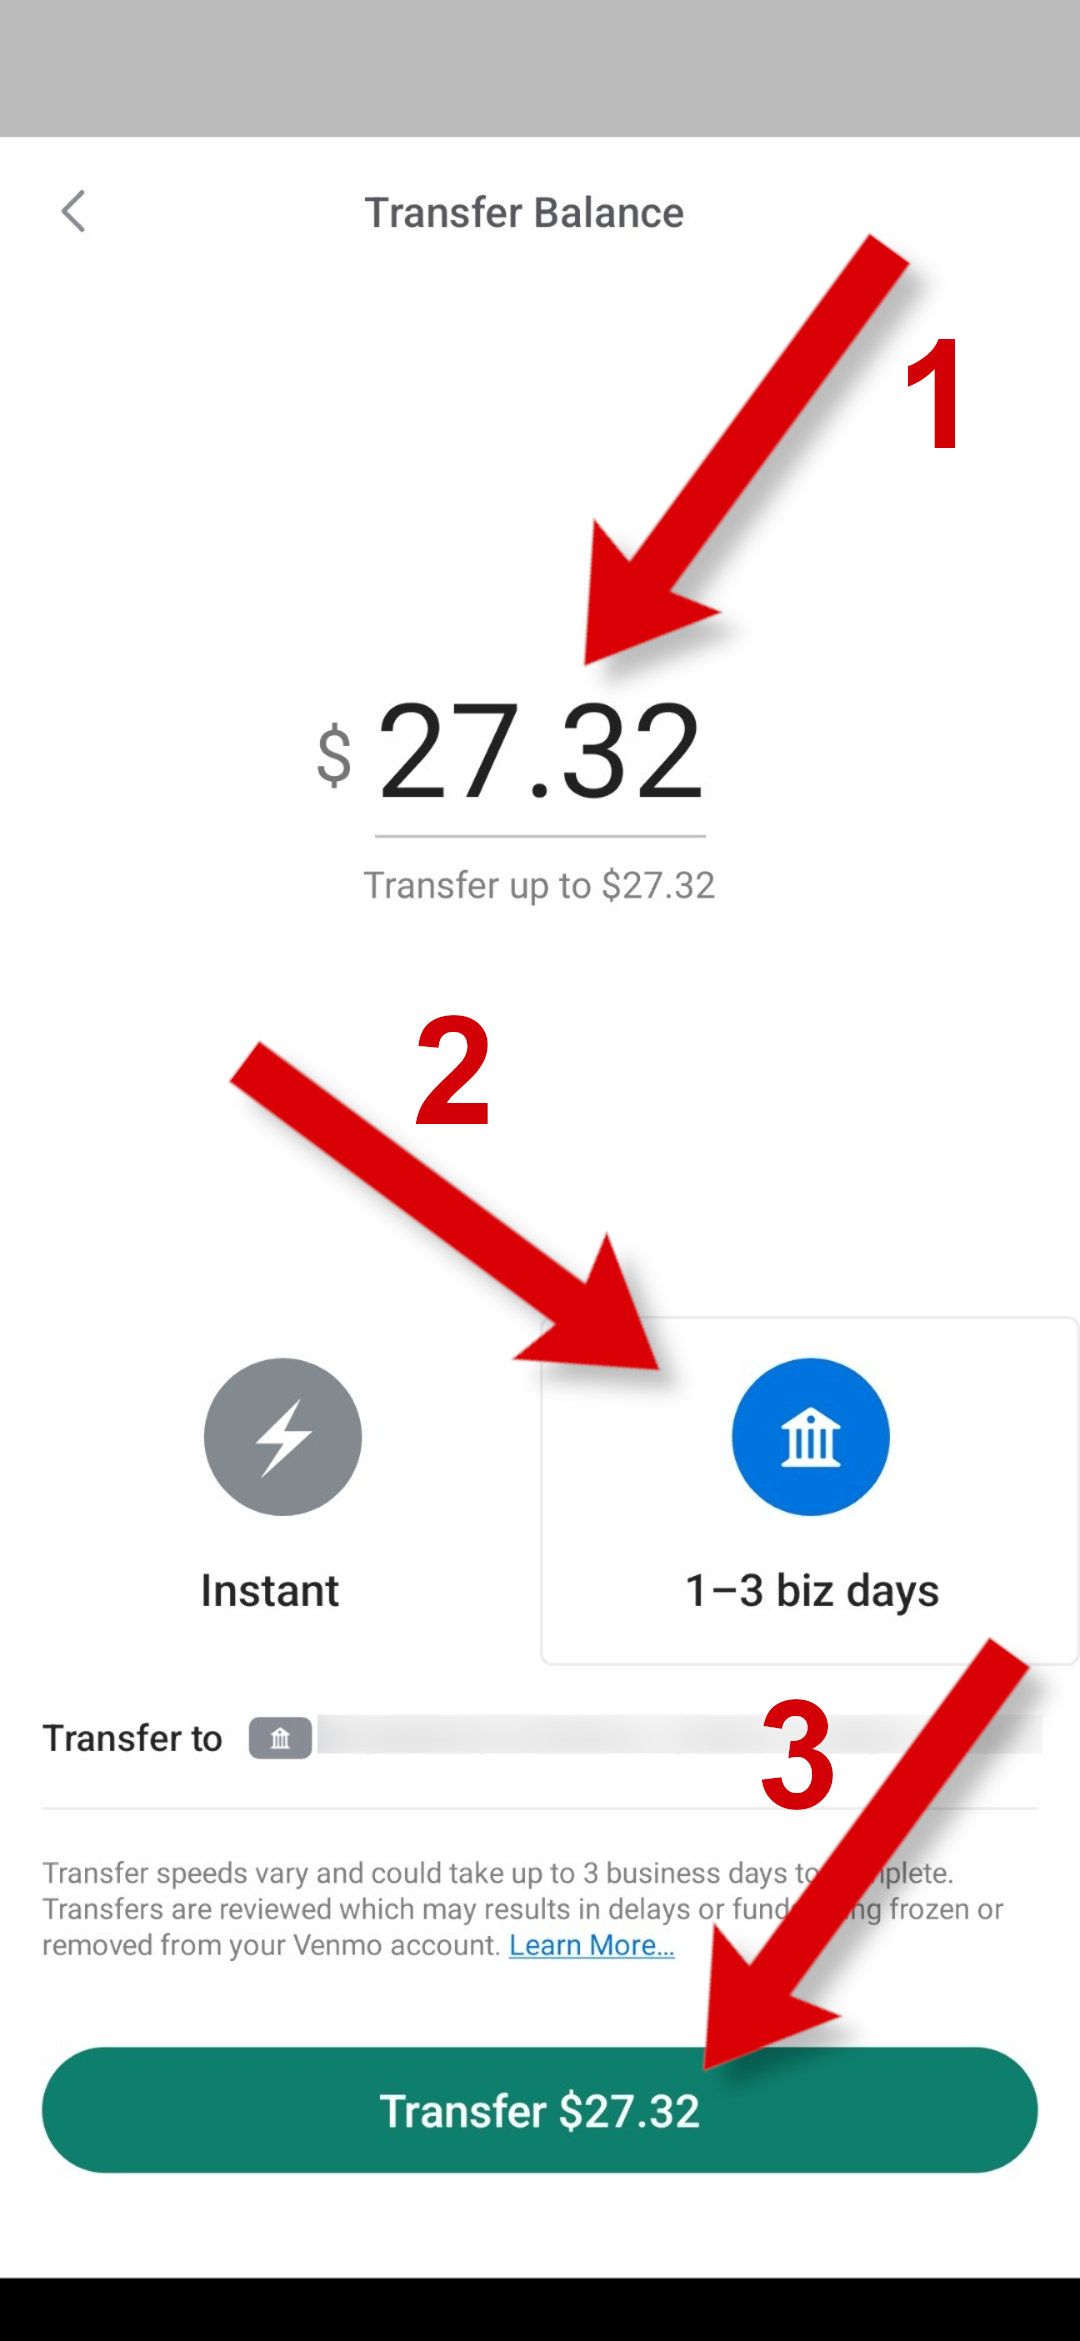 A screenshot of the Venmo app showing the steps to transfer funds to your bank.